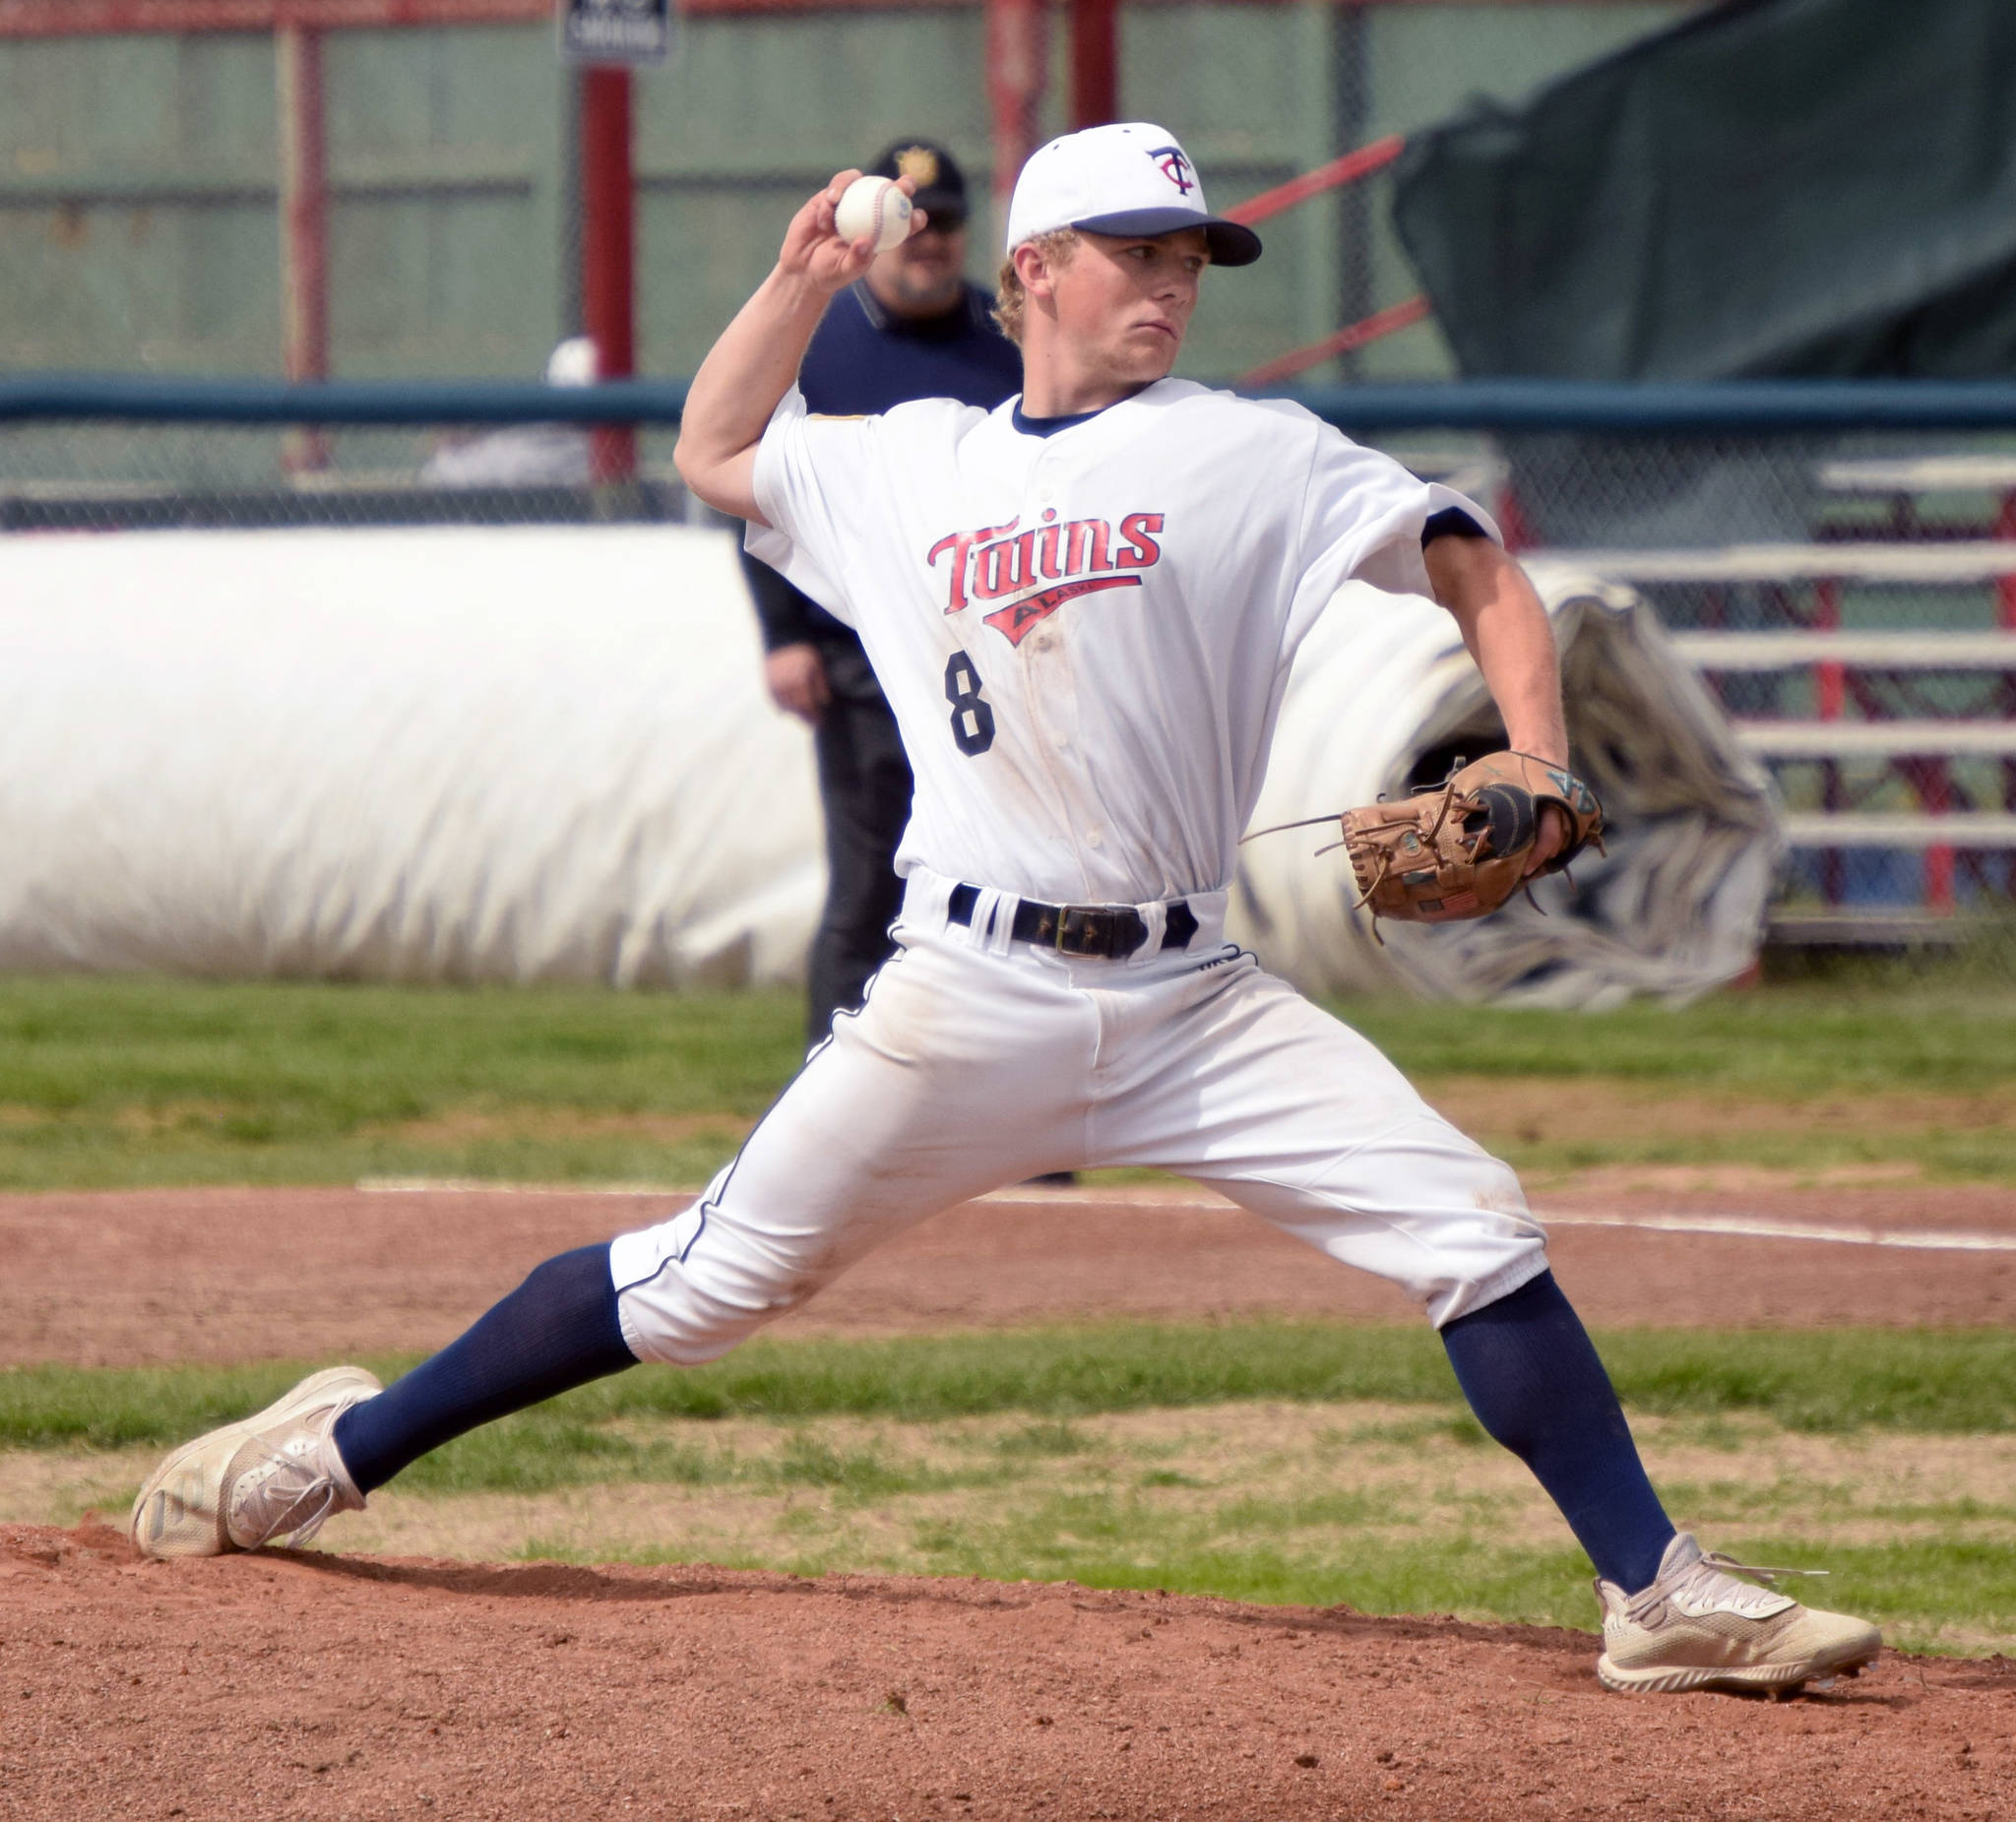 Twins starting pitcher Harrison Metz delivers to Service on Thursday, July 1, 2021, at Coral Seymour Memorial Park in Kenai, Alaska. (Photo by Jeff Helminiak/Peninsula Clarion)